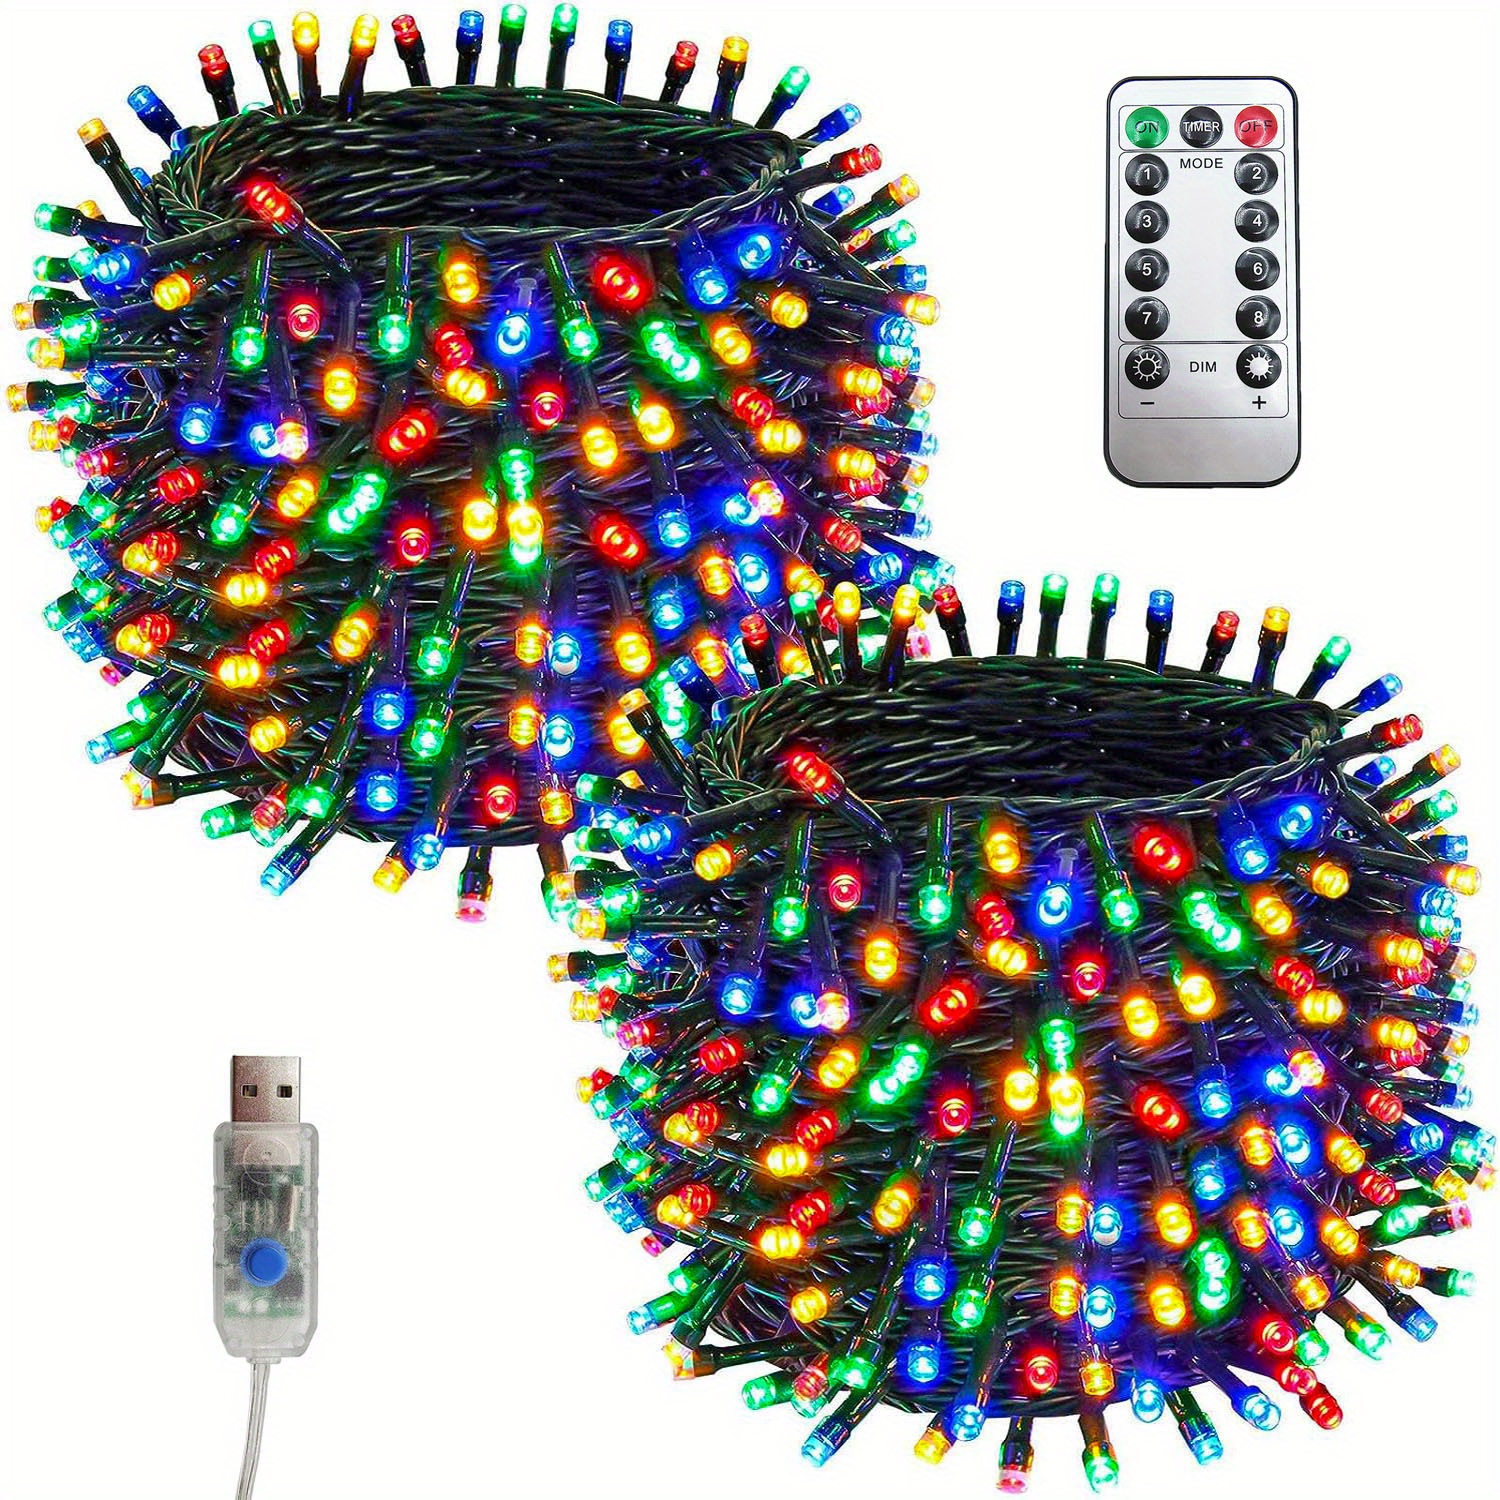  Joomer Color Changing Christmas Lights, 66ft 200 LED String  Lights Timer Function with Remote, Connectable Christmas Decor for Indoor,  Outdoor, Yard, Tree, Party(Warm White & Multicolor) : Baby